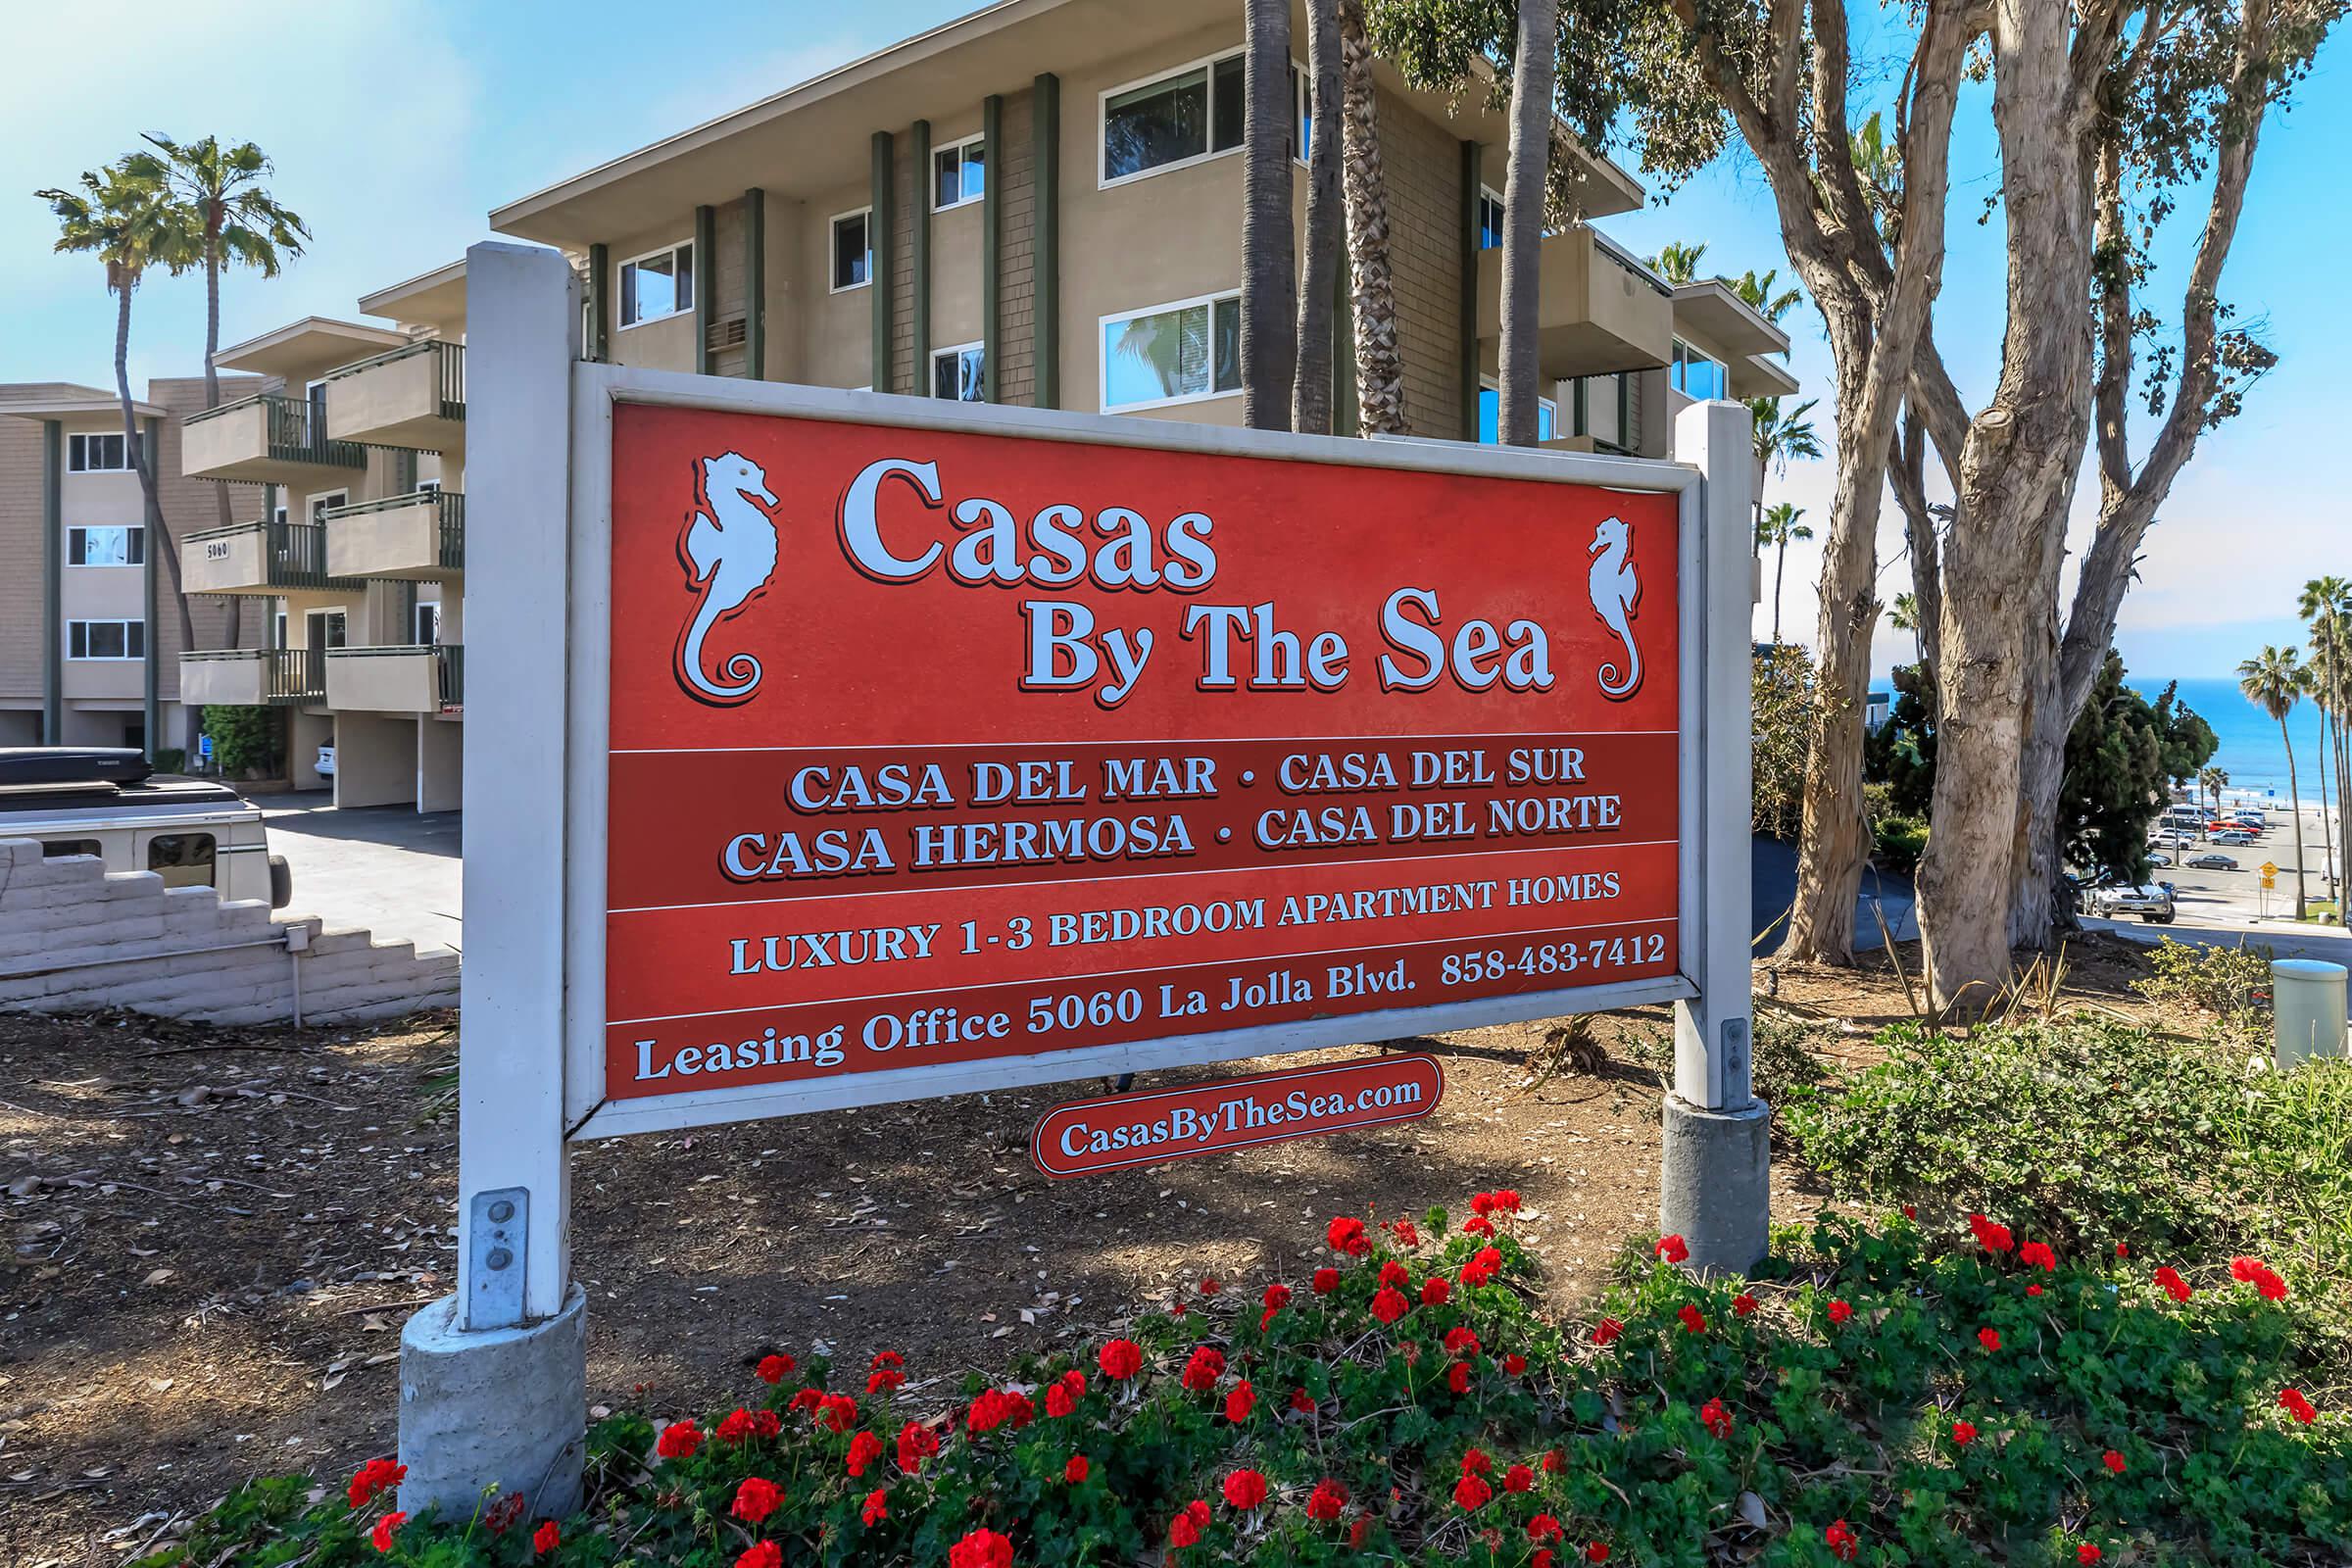 Apartments for Rent in San Diego - Casa Del Norte Apartments - Front Exterior Signage, Welcome Home to Casa Del Norte